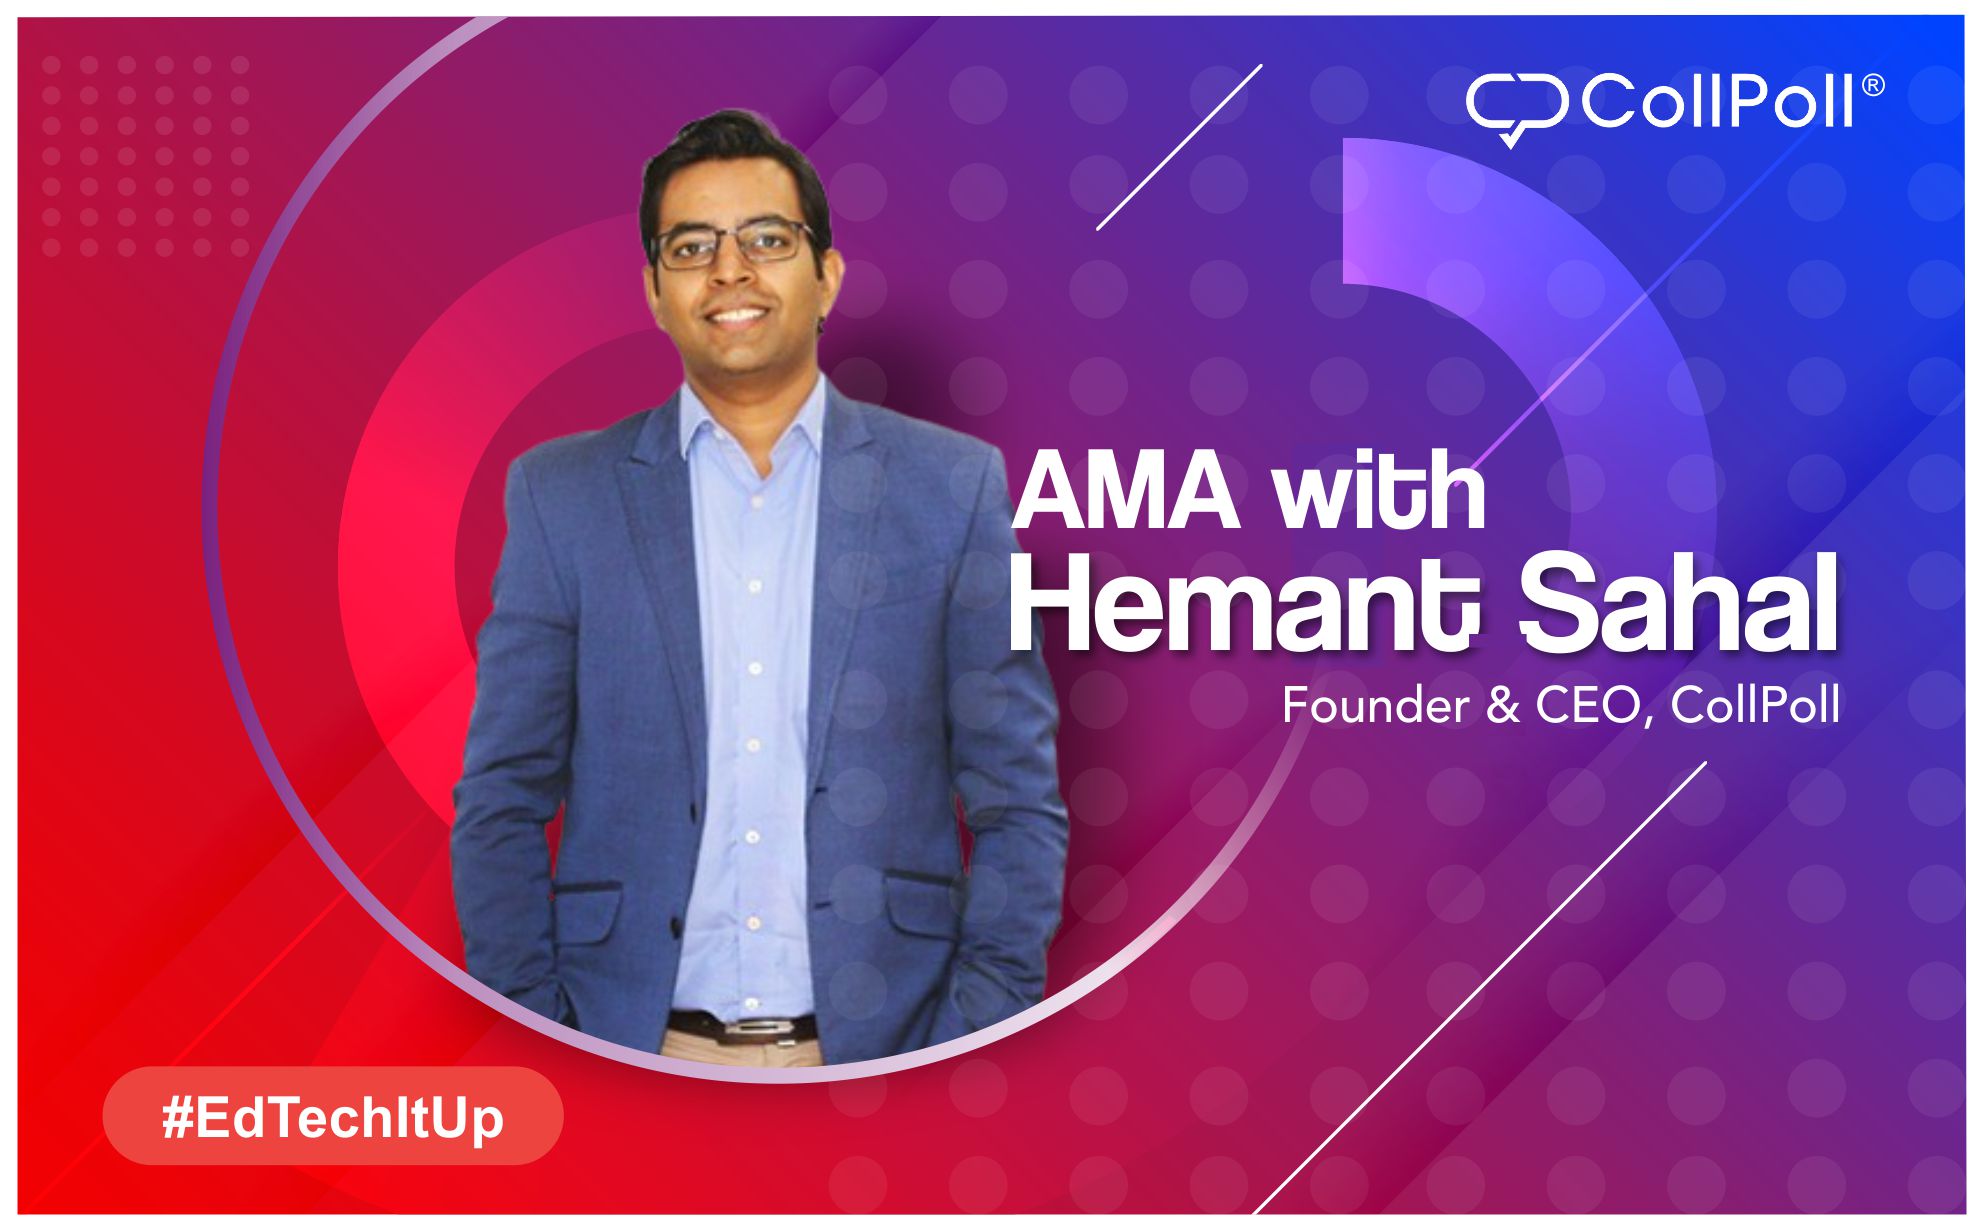 CollPoll’s Ask Me Anything (AMA) Series Featuring Hemant Sahal